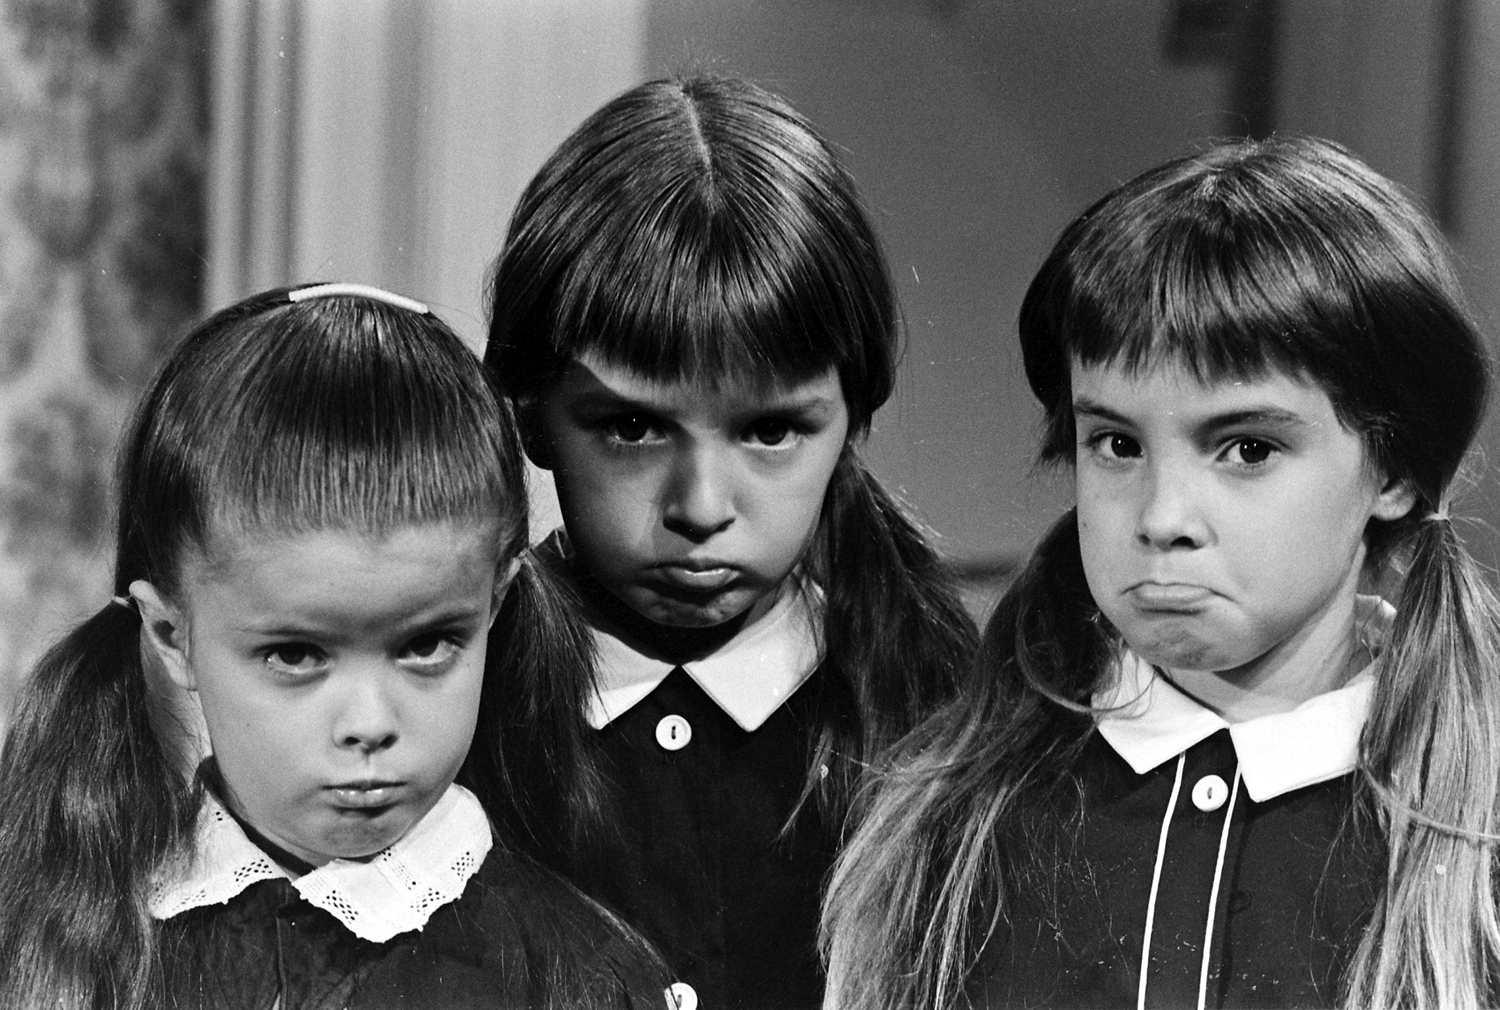 Girls auditioning for the role of Wednesday Friday Addams -- including Lisa Loring, at left, who was eventually cast.